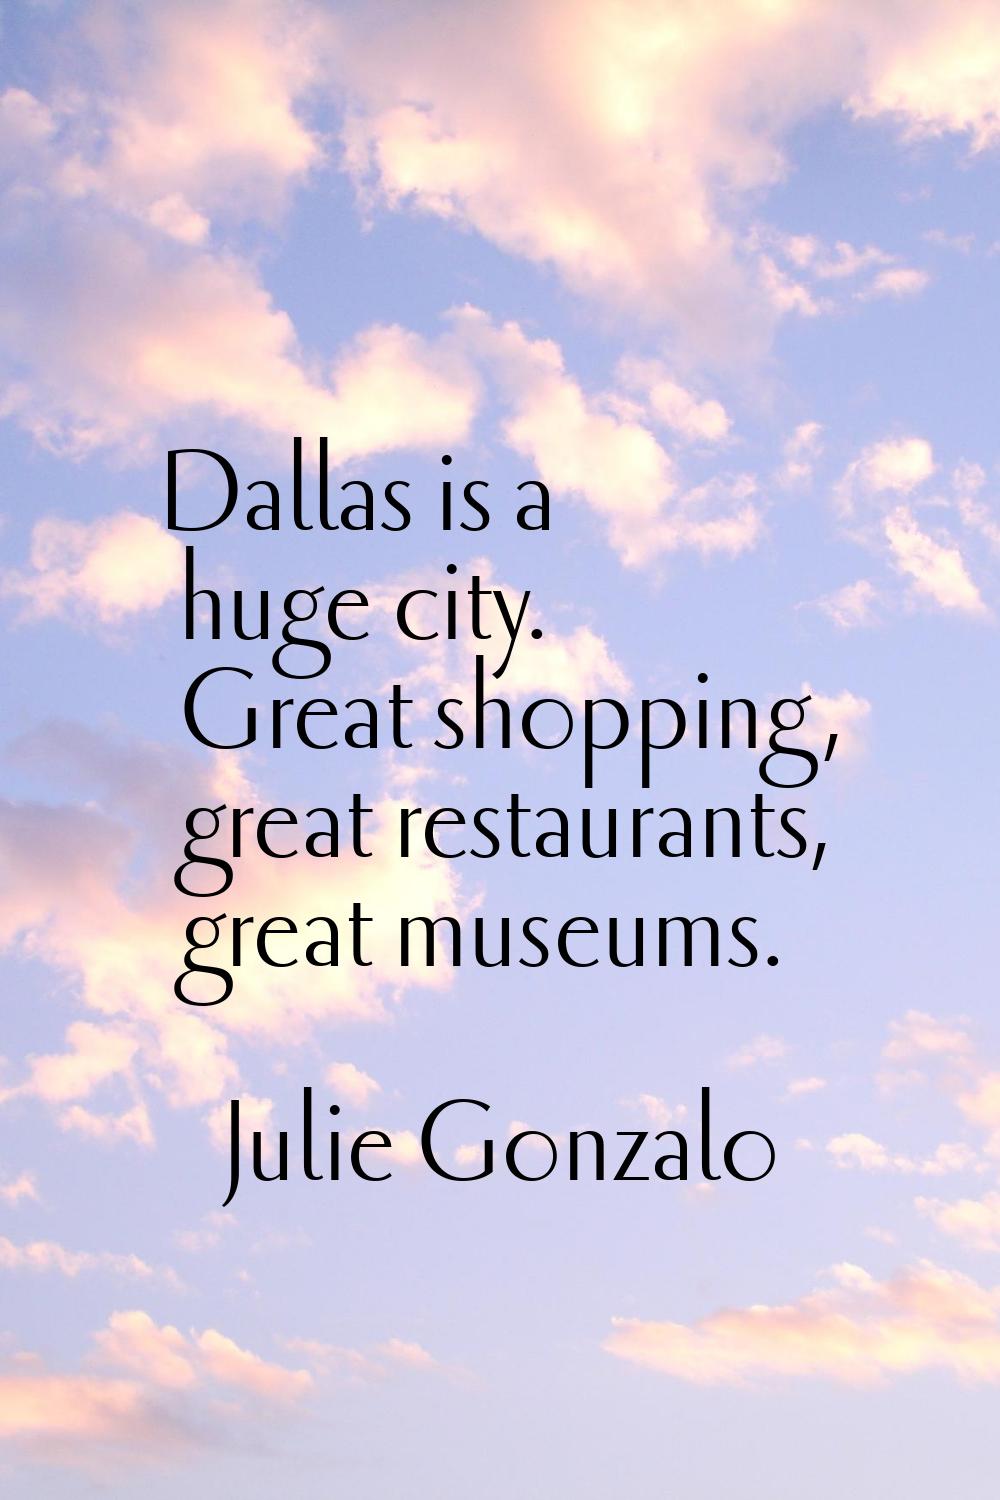 Dallas is a huge city. Great shopping, great restaurants, great museums.